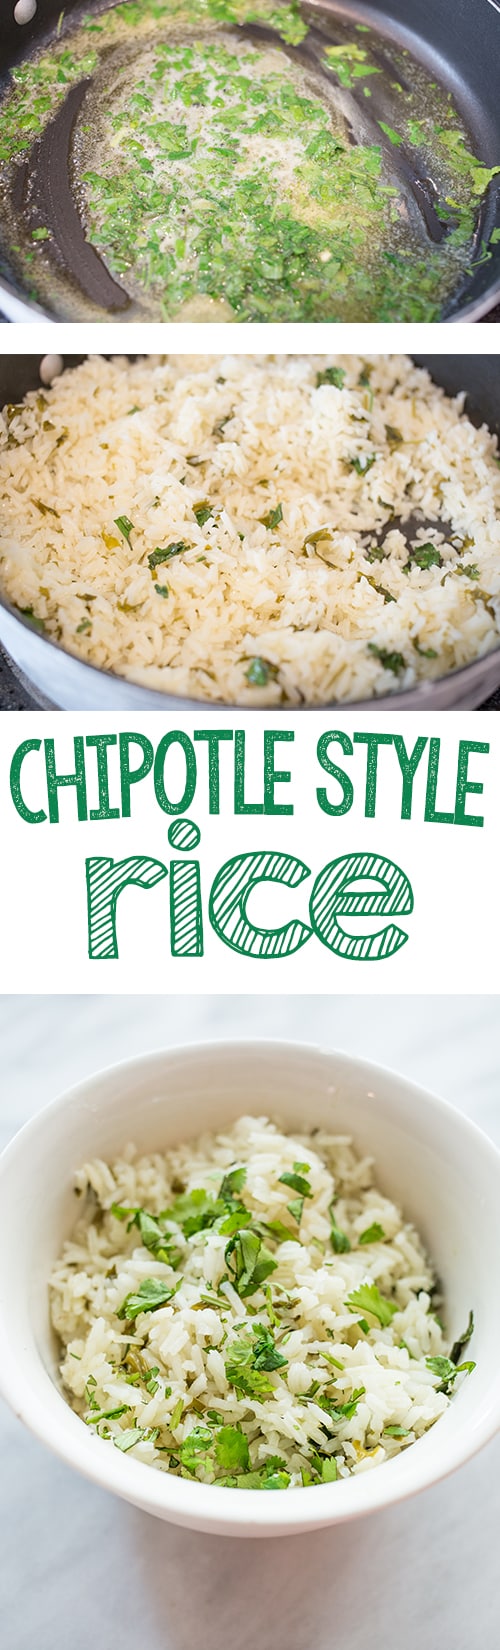 pan with butter and cilantro in it, bowl of rice with cilantro and lime juice in it